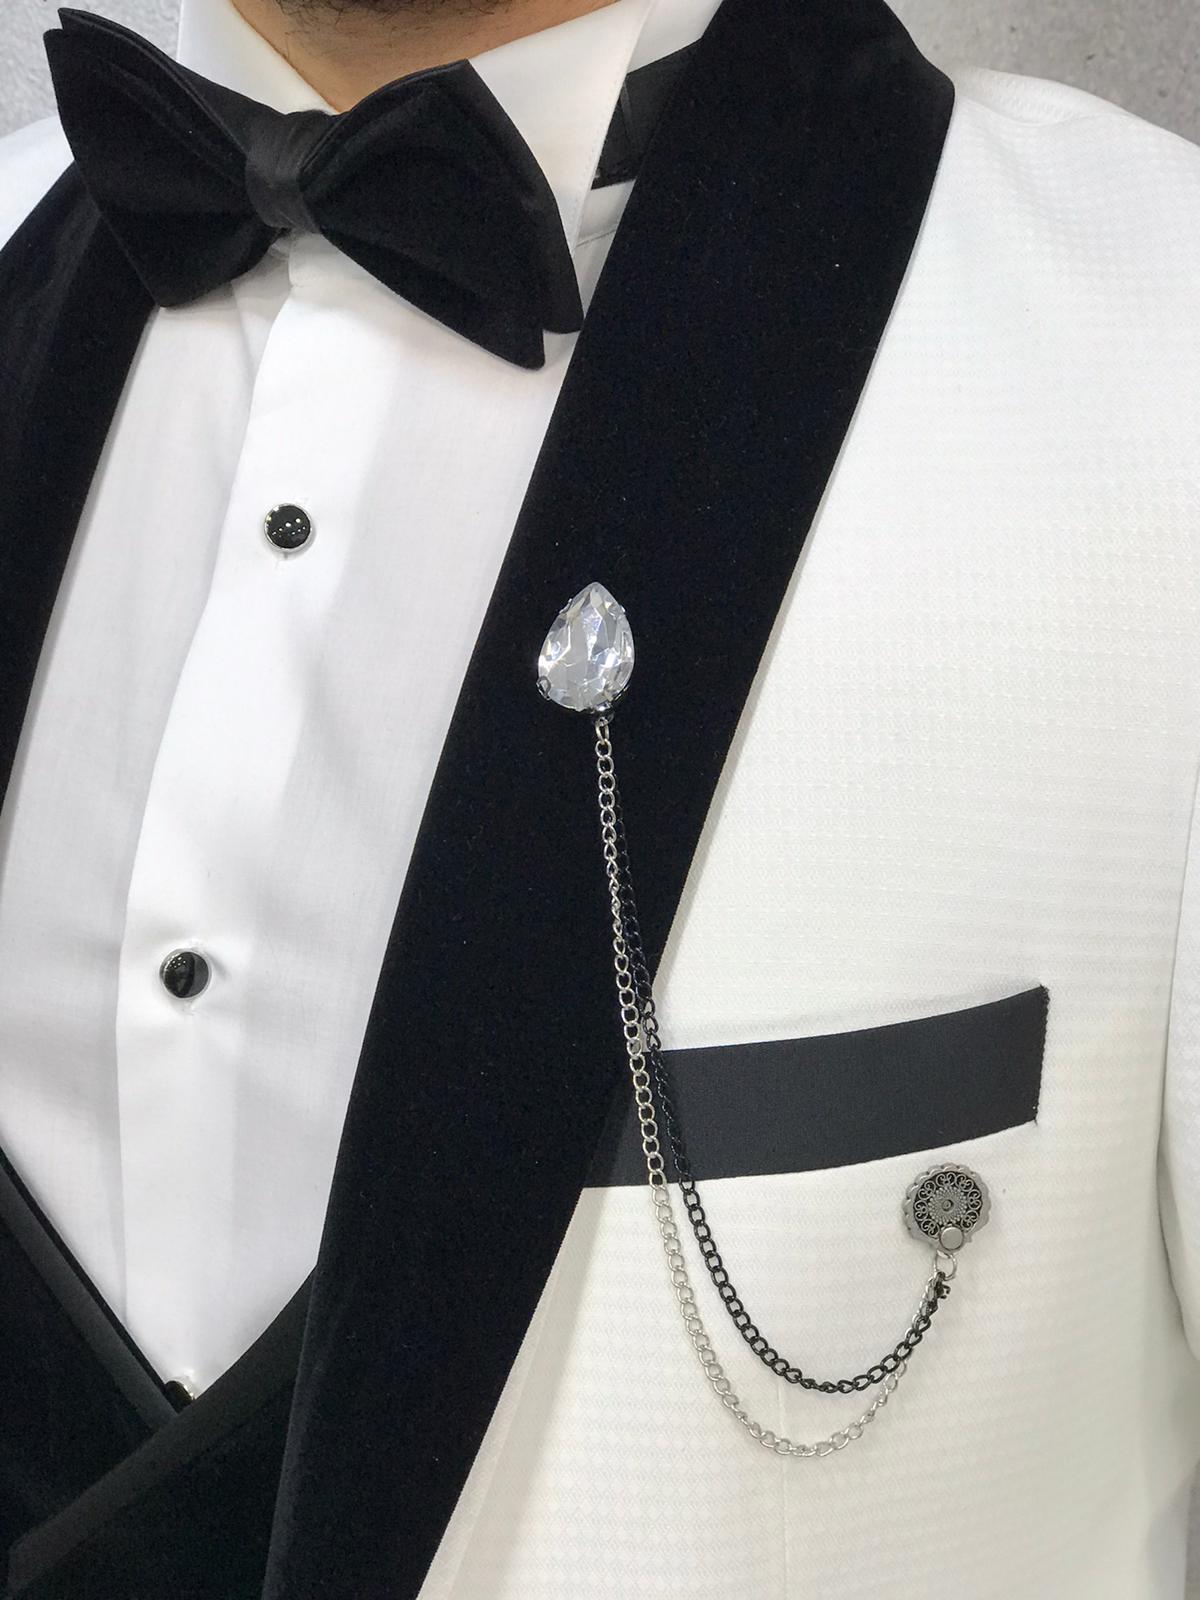 Everything You Need to Know about Tuxedos by GentWith Blog